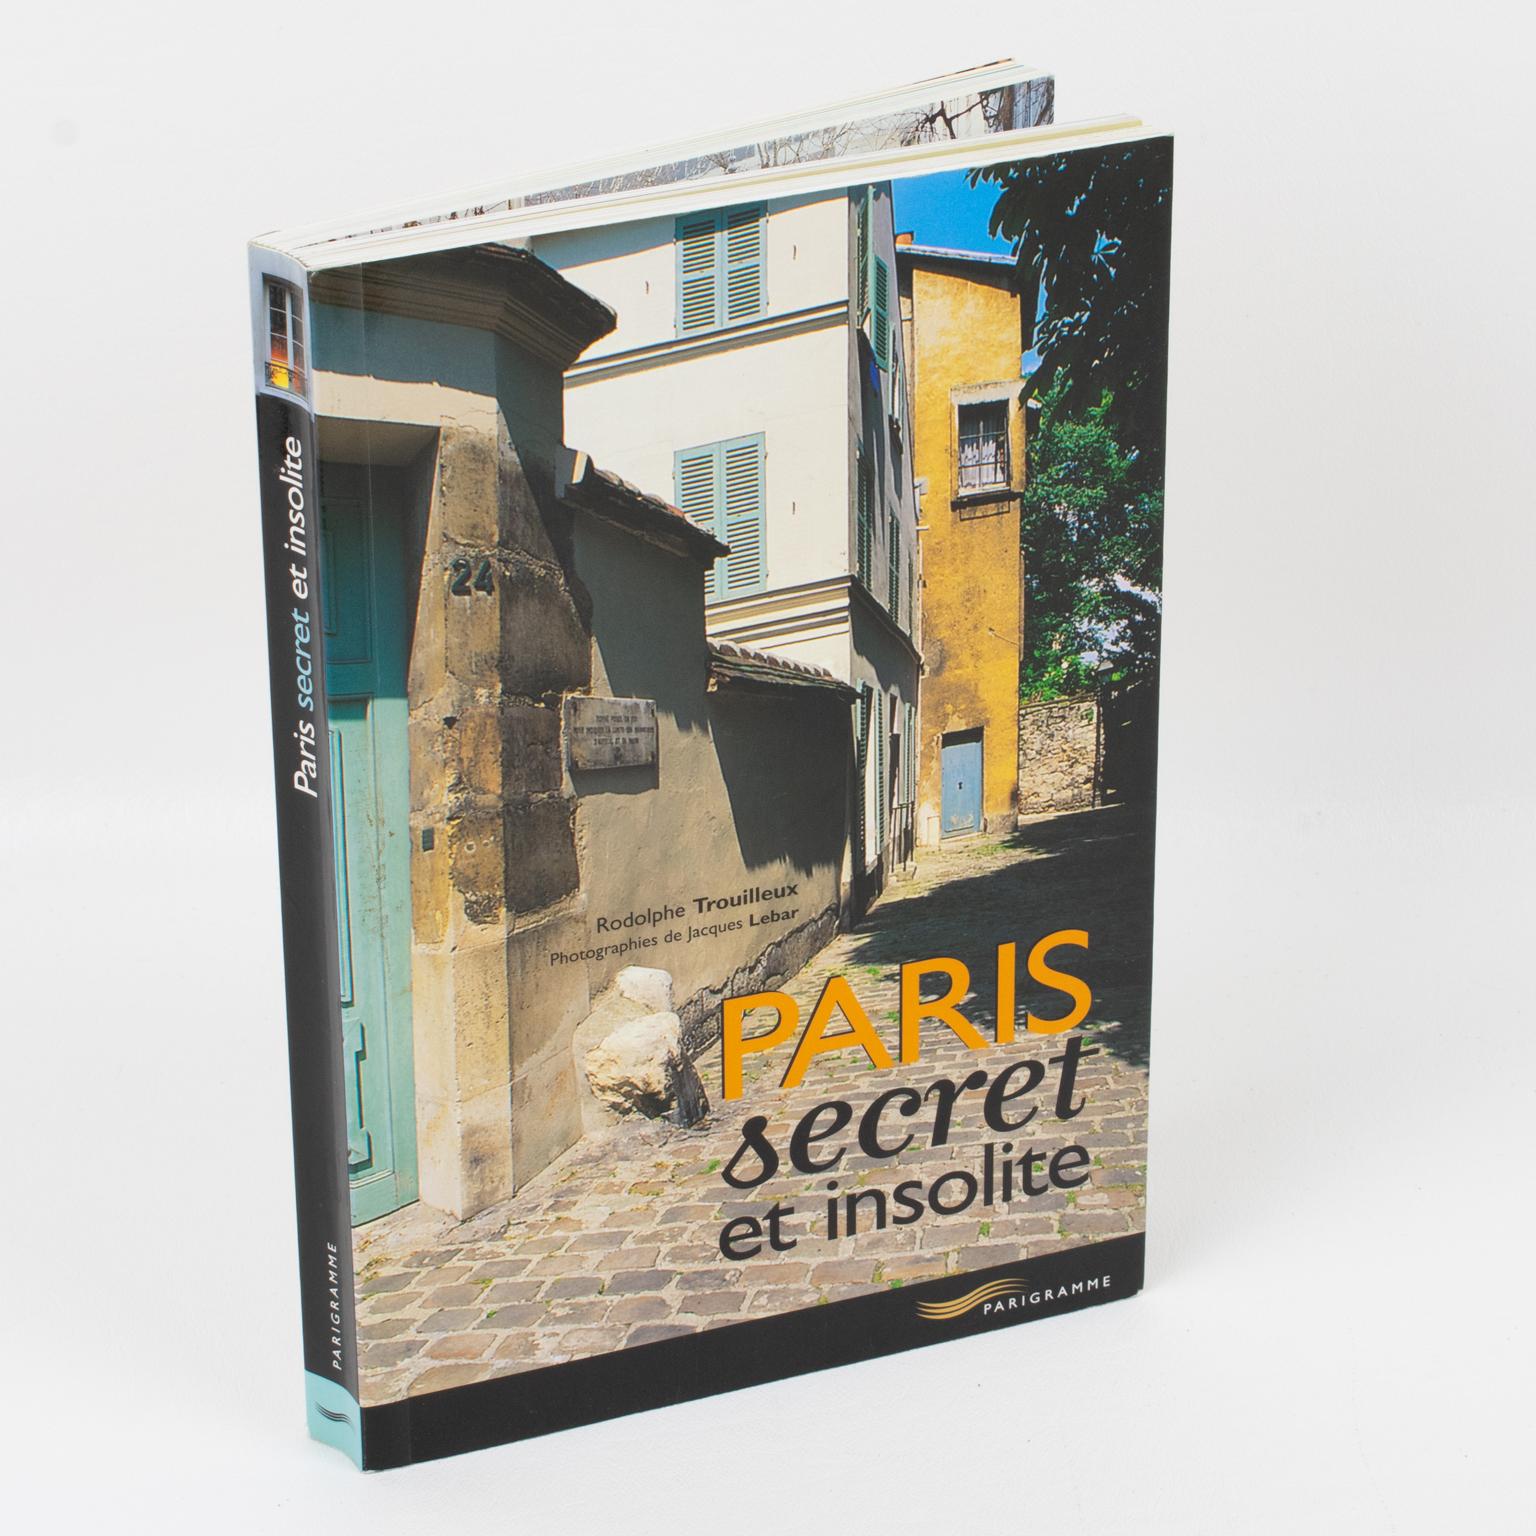 Paris Secret et Insolite (Secret and Unusual Paris), French book by Rodolphe Trouilleux.
Under the cobblestones, surprises: forgotten dead-ends, a cloister converted into workshops, a real-fake medieval house, the slabs of the guillotine, a